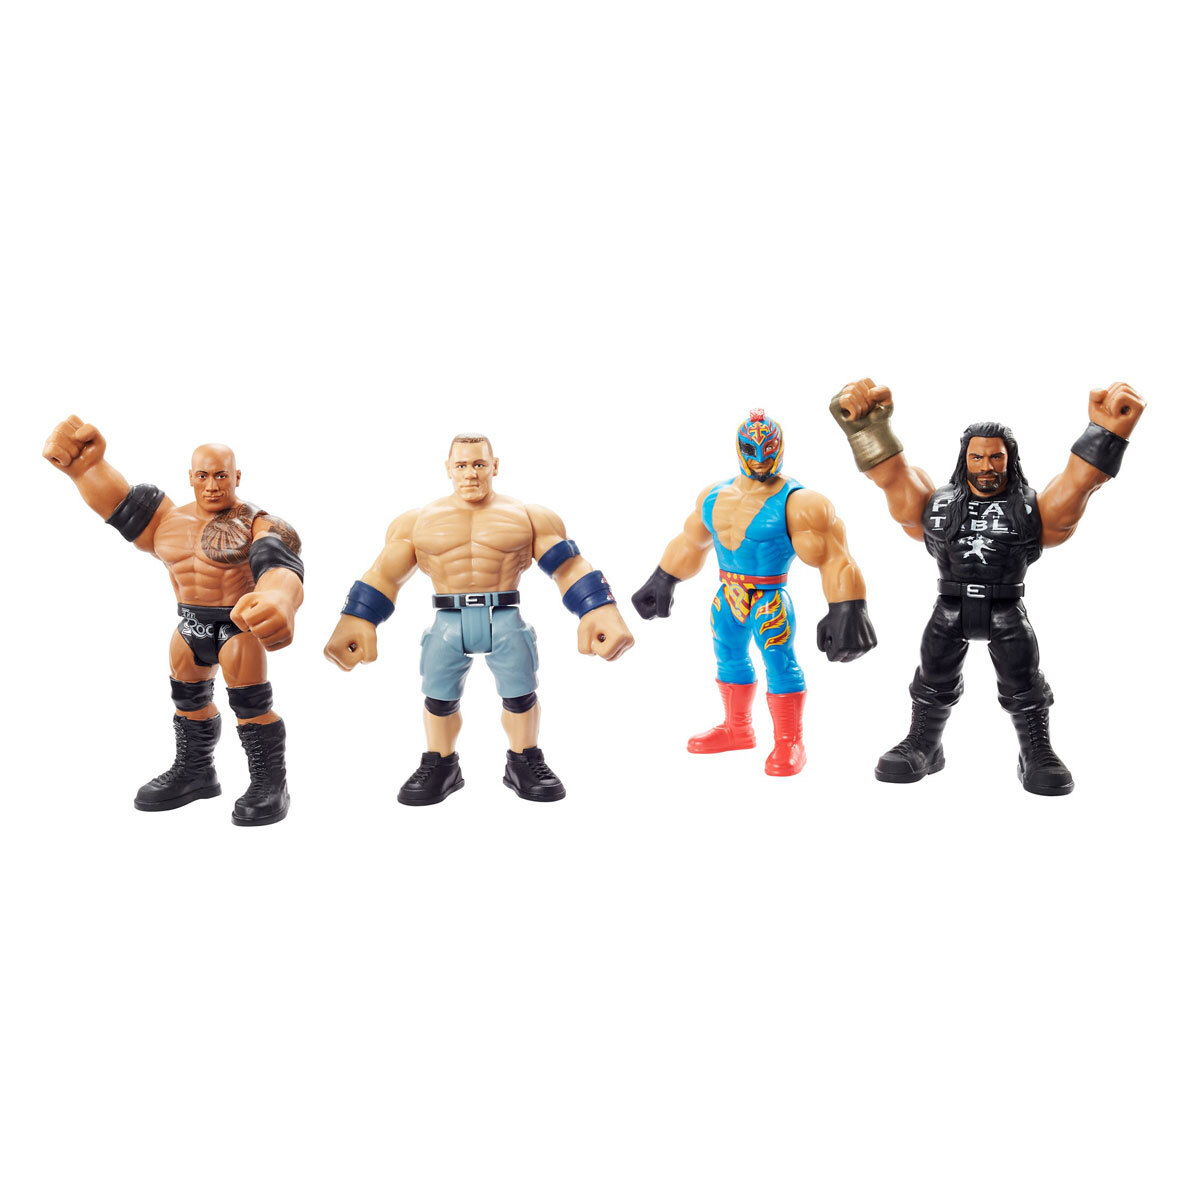 Wwe Bend N Bash Action Figures Styles Vary The Entertainer